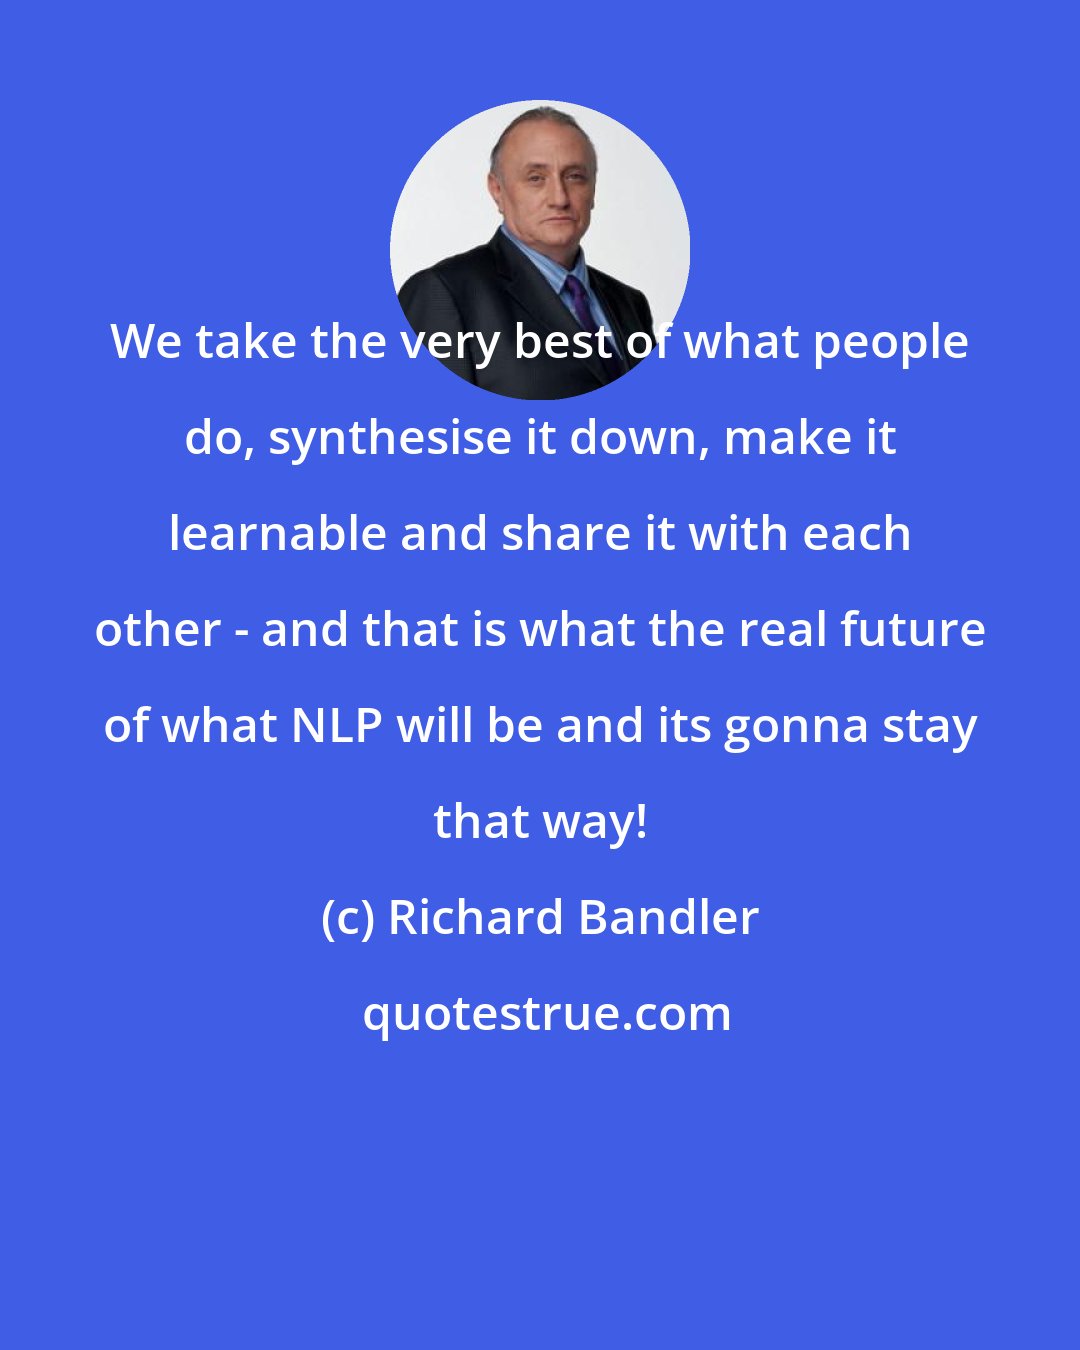 Richard Bandler: We take the very best of what people do, synthesise it down, make it learnable and share it with each other - and that is what the real future of what NLP will be and its gonna stay that way!